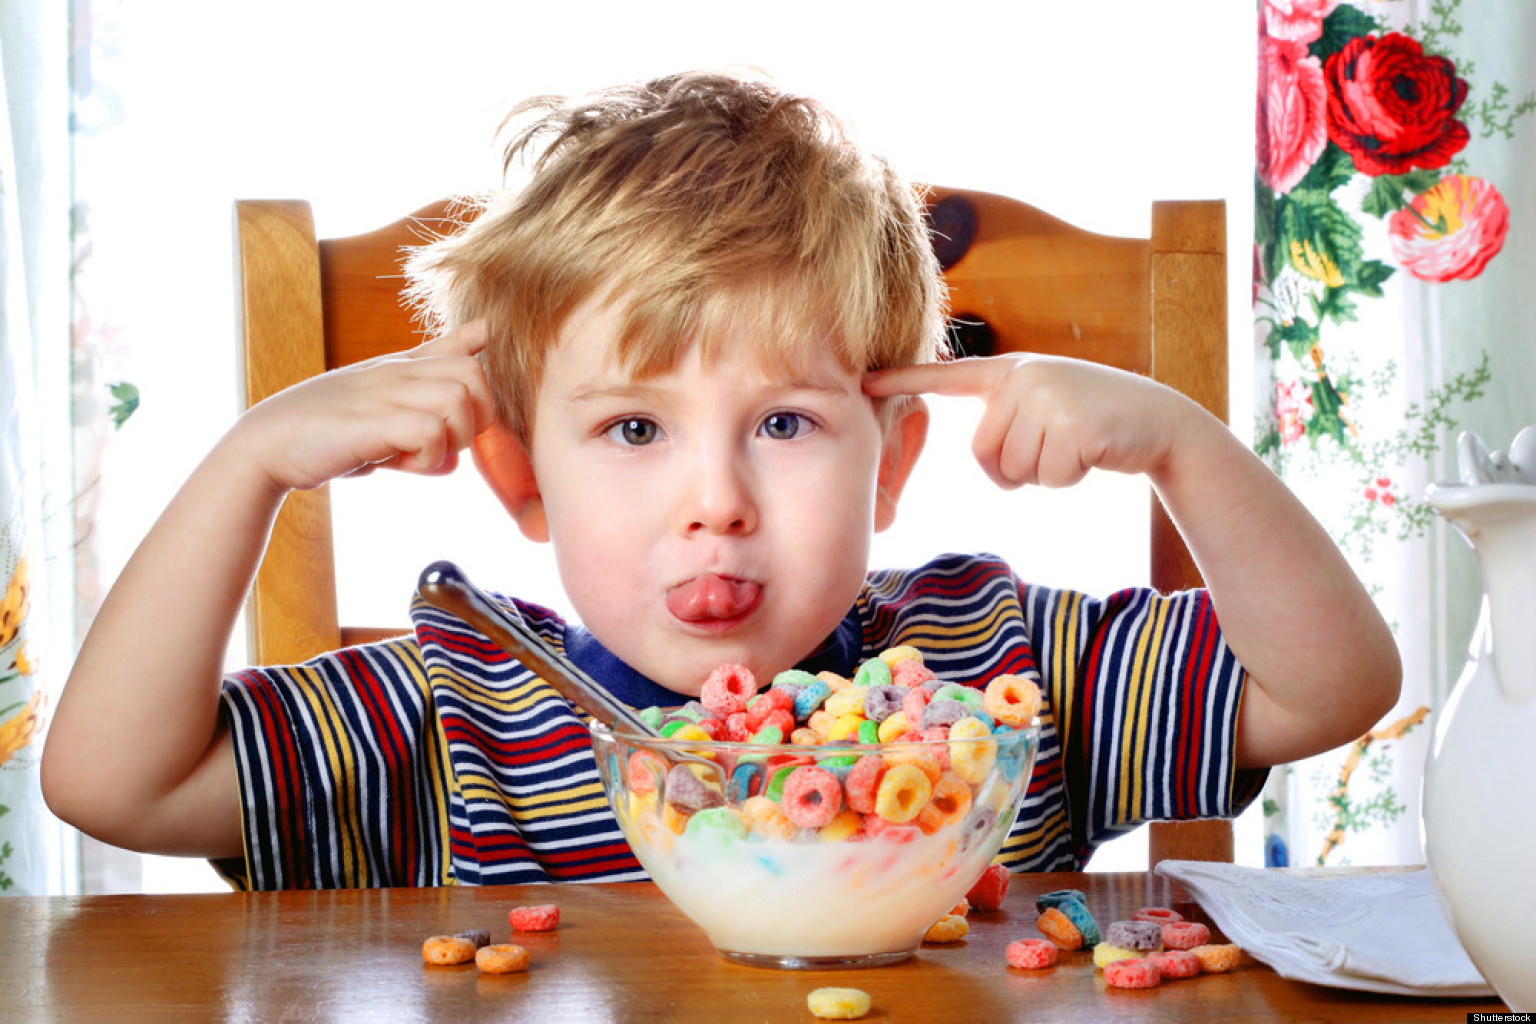 Sugar doesn't make kids hyperactive. It's a common misconception by parents. There was a study where parents would give kids sugar free treats (not knowing it didn't contain sugar) and they still thought that it made their children hyperactive.